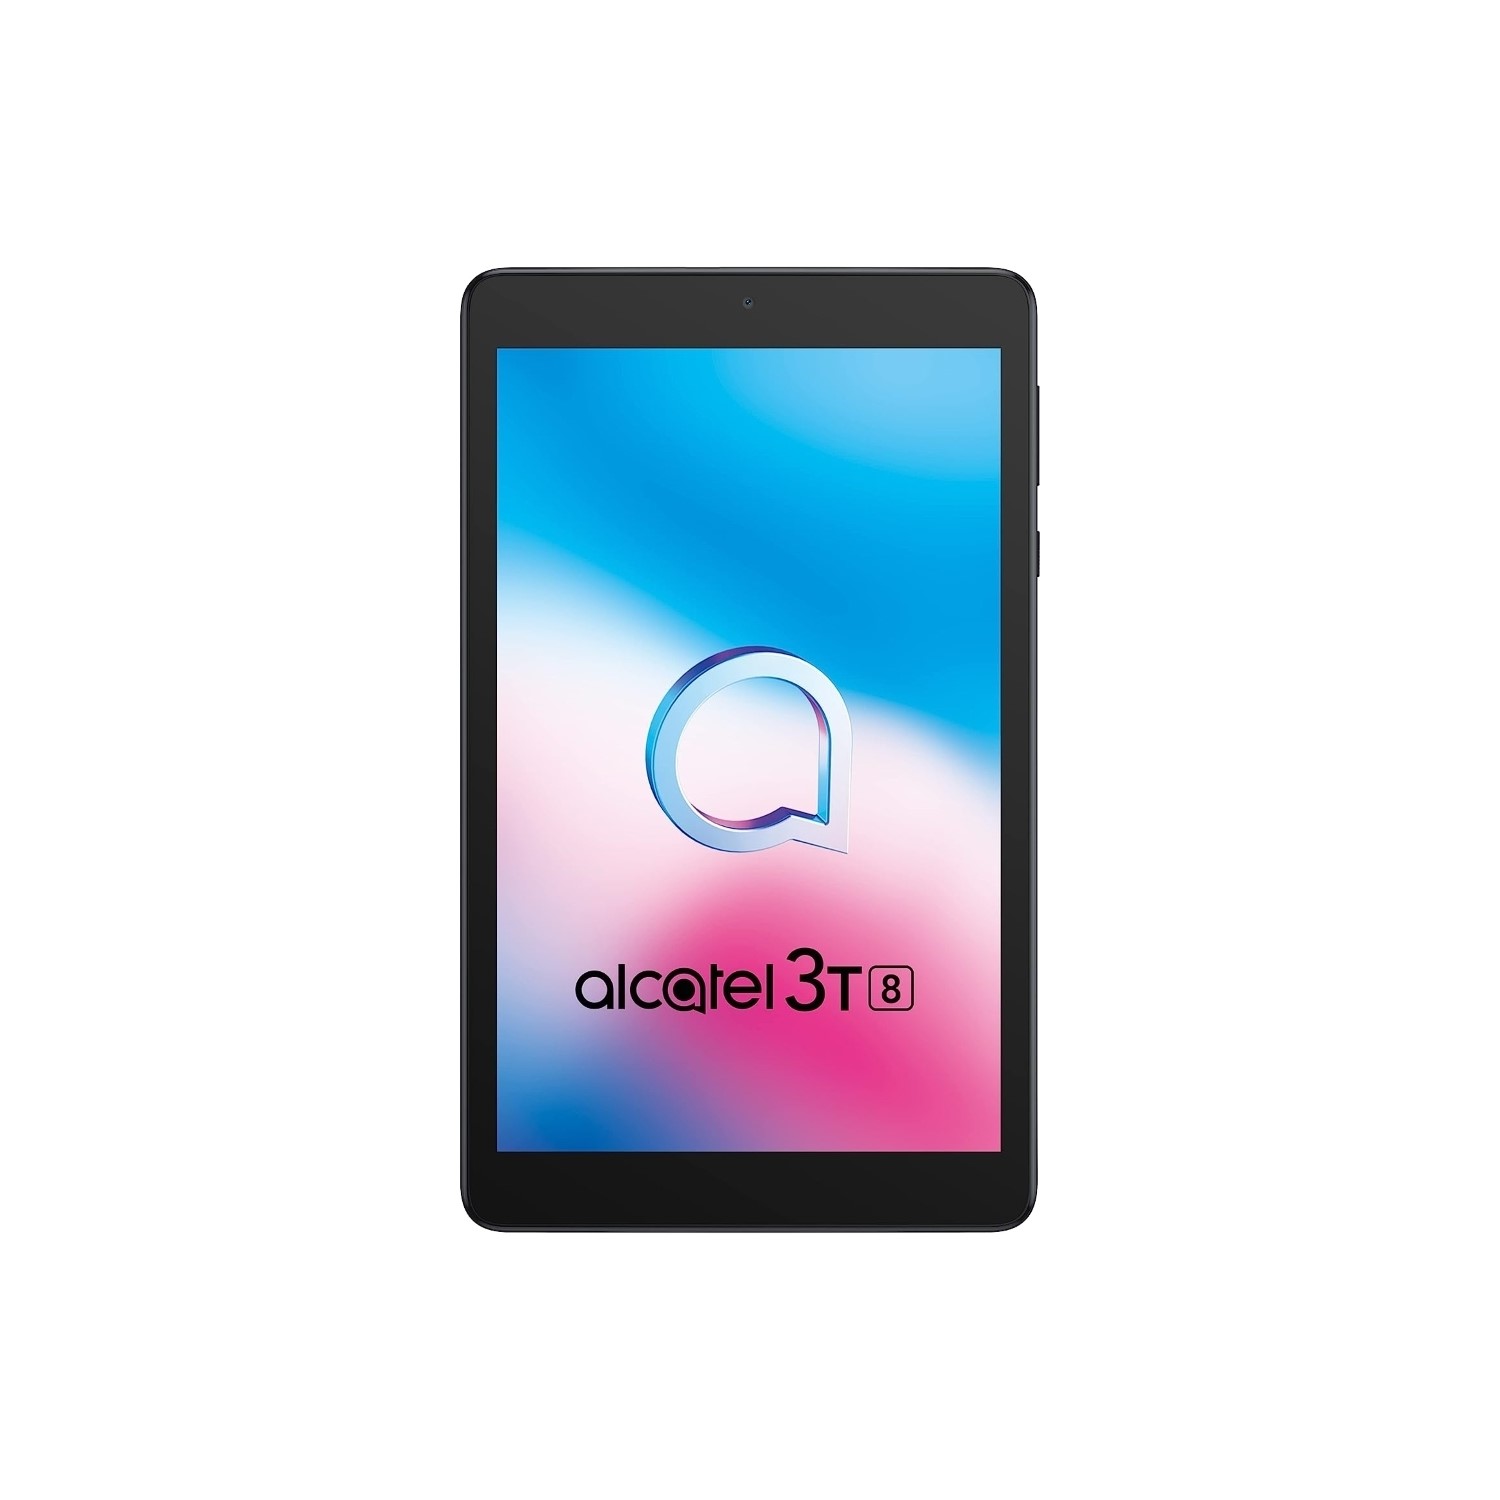 Alcatel Mobile  Smartphones, Tablets & Connected Devices : Alcatel Mobile